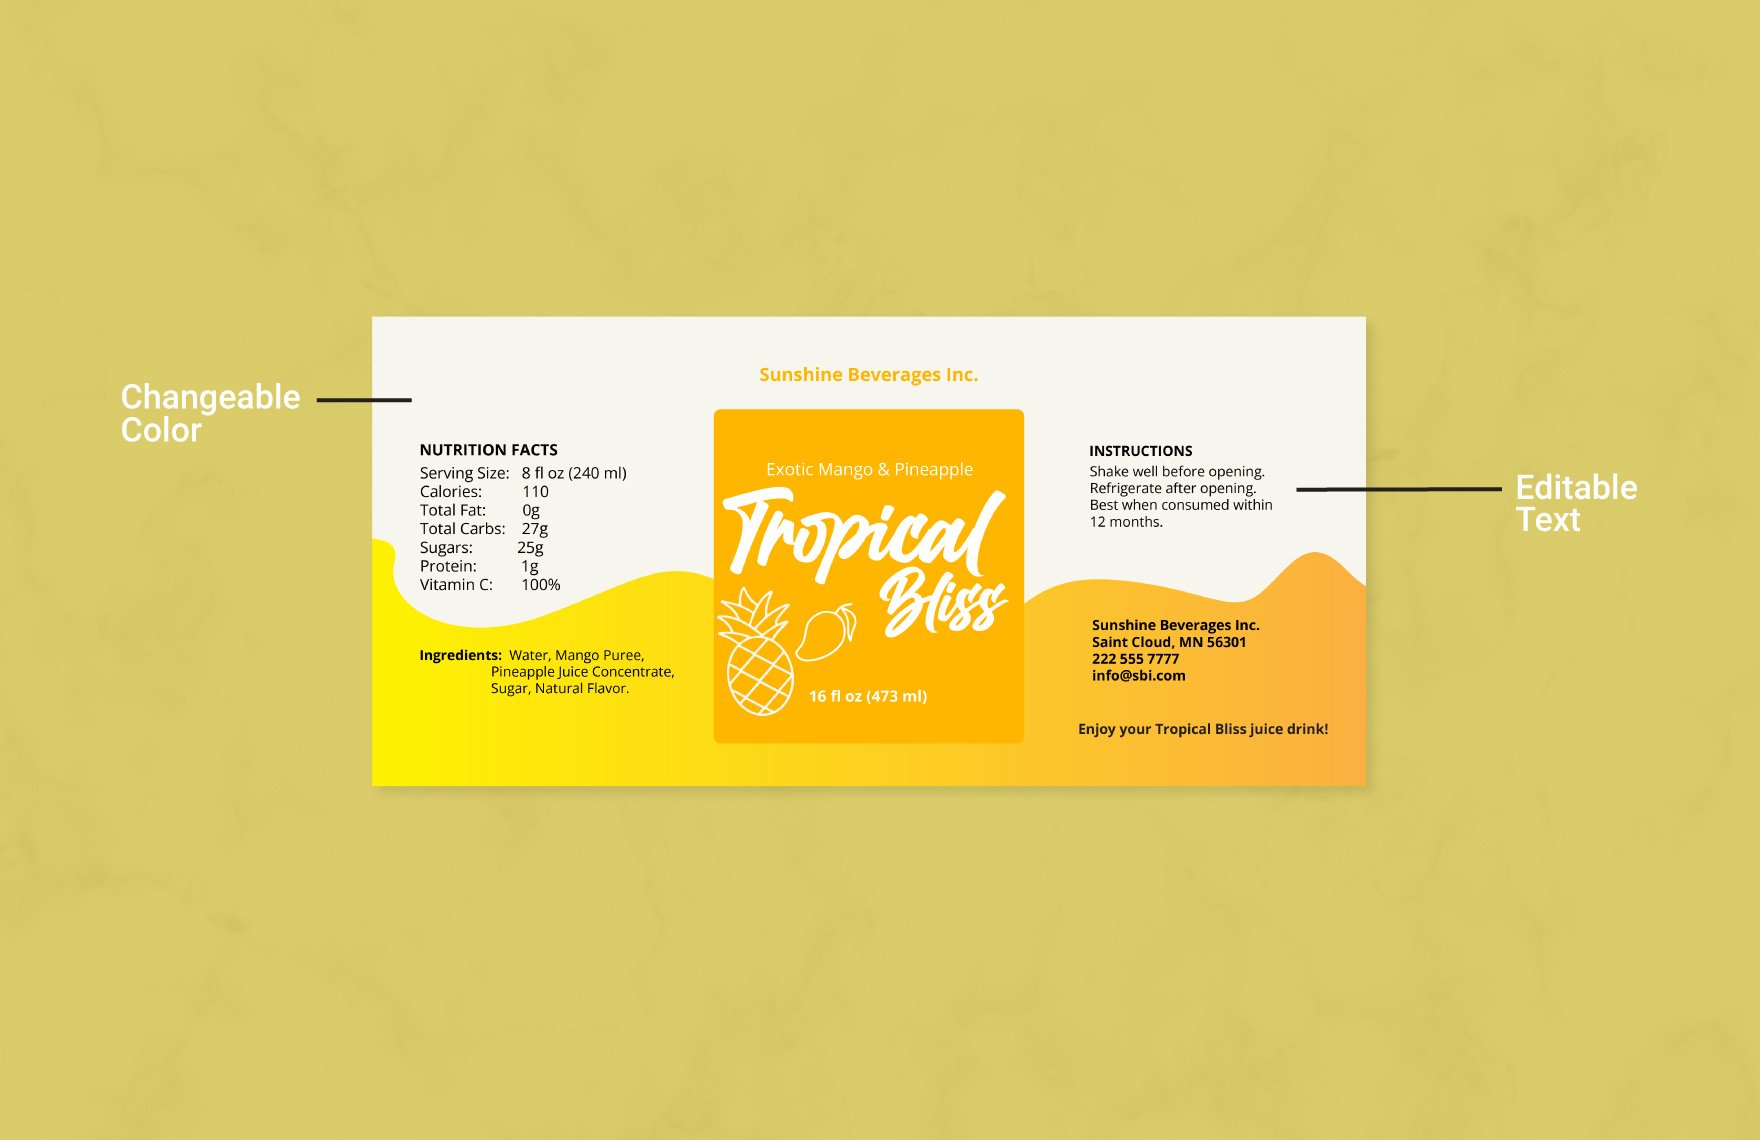 Drink Label Template